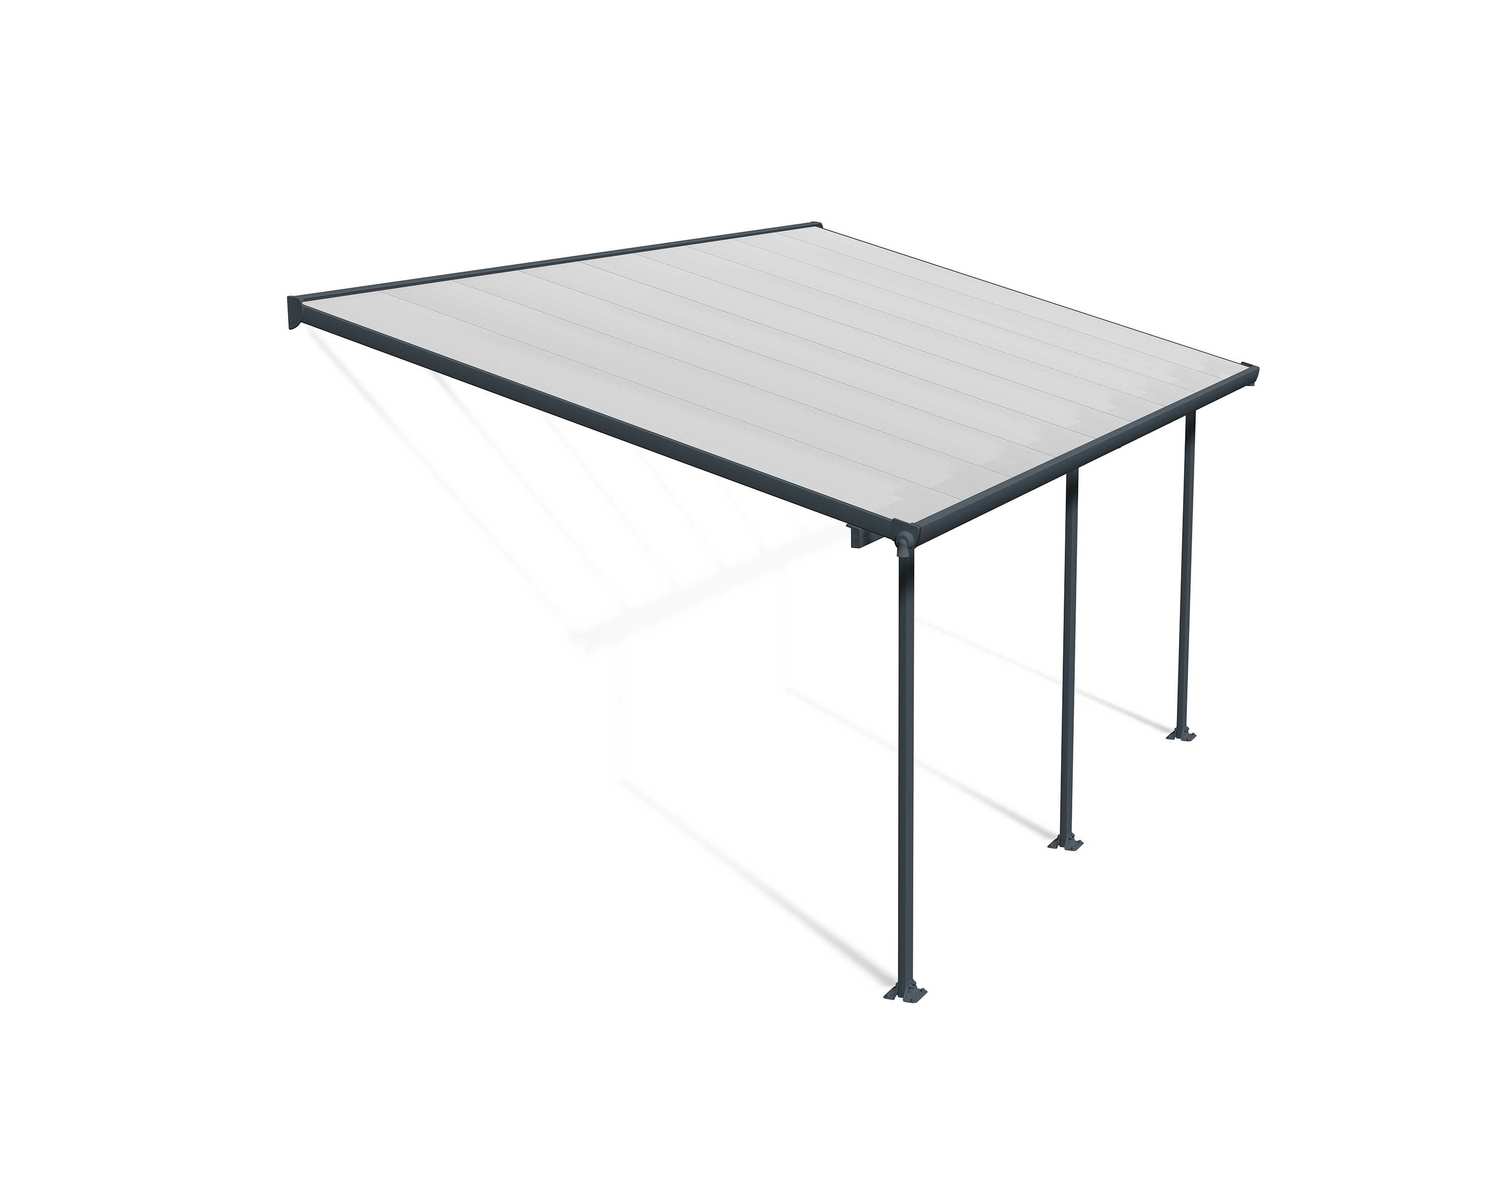 Feria 10 ft. x 18 ft. Grey Aluminium Patio Cover With 3 Posts, Clear Twin-Wall Polycarbonate Roof Panels.